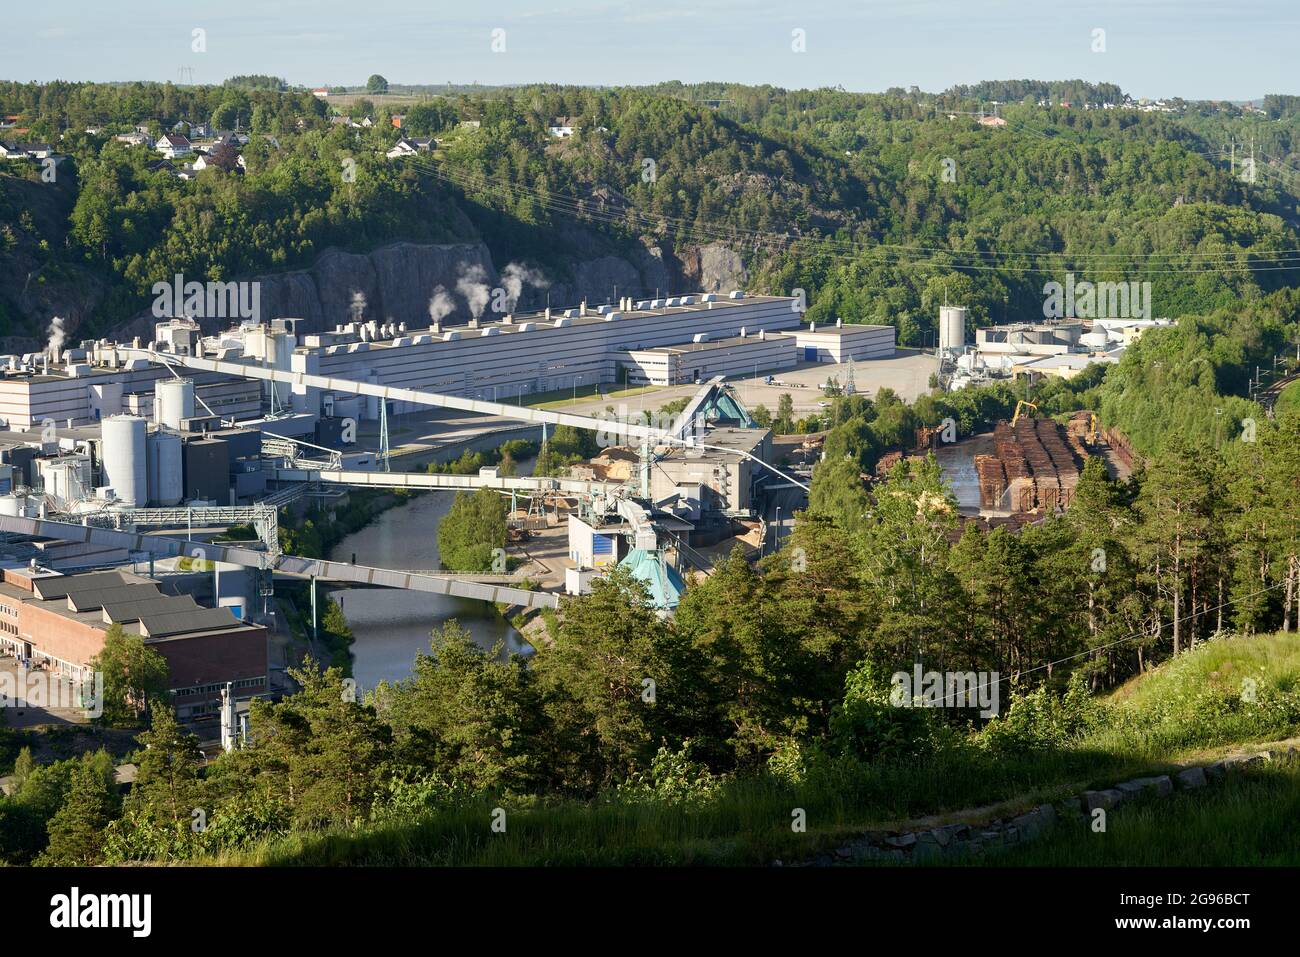 SARPSBORG, NORWAY - Jun 13, 2021: An aerial shot of chemical and paper industry buildings around the Glomma river Stock Photo